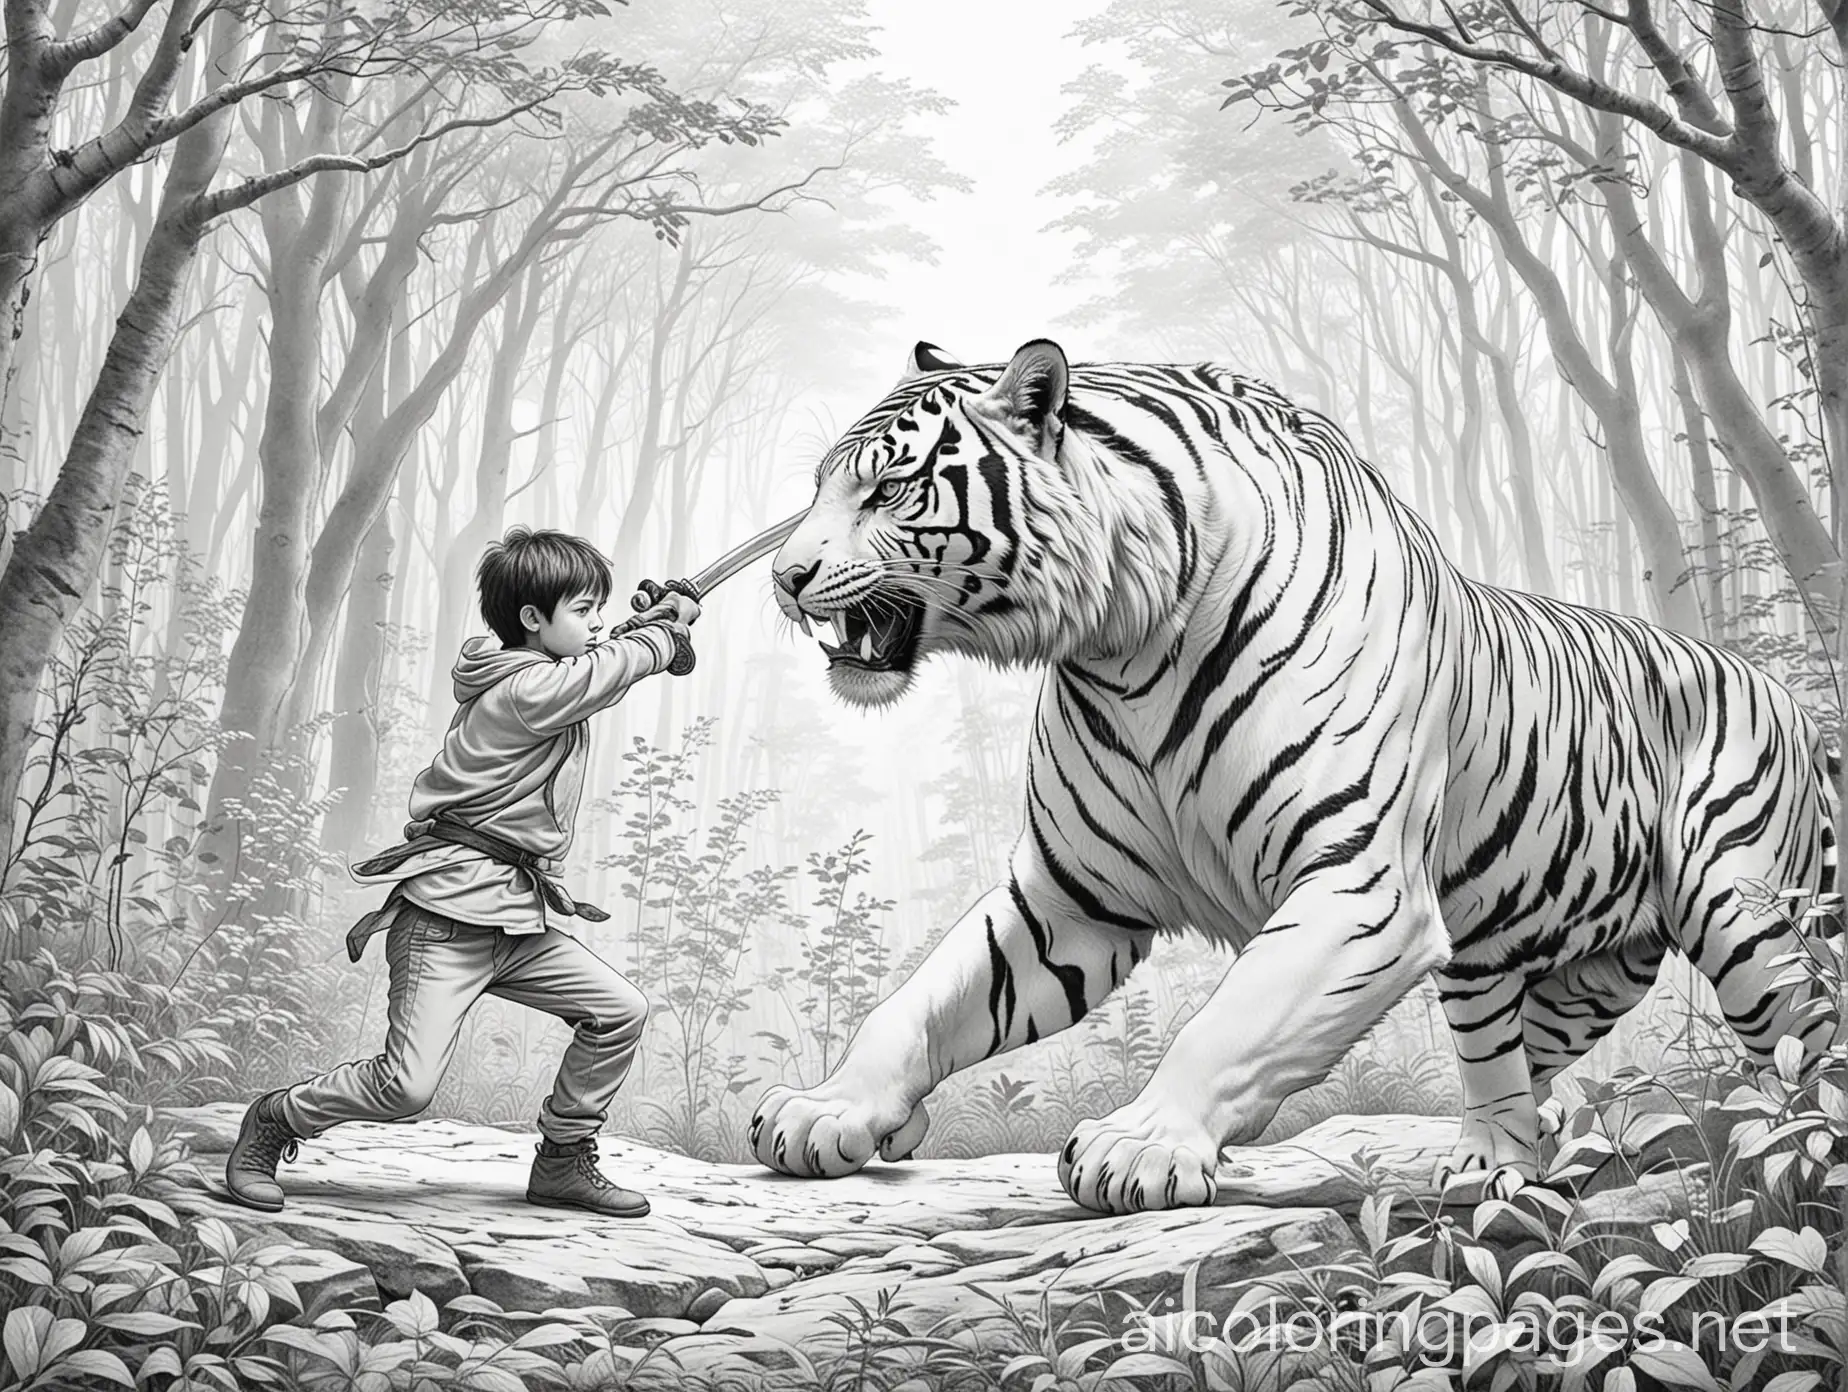 Brave-Boy-Battles-Tiger-with-Sword-in-Enchanted-Forest-Coloring-Page